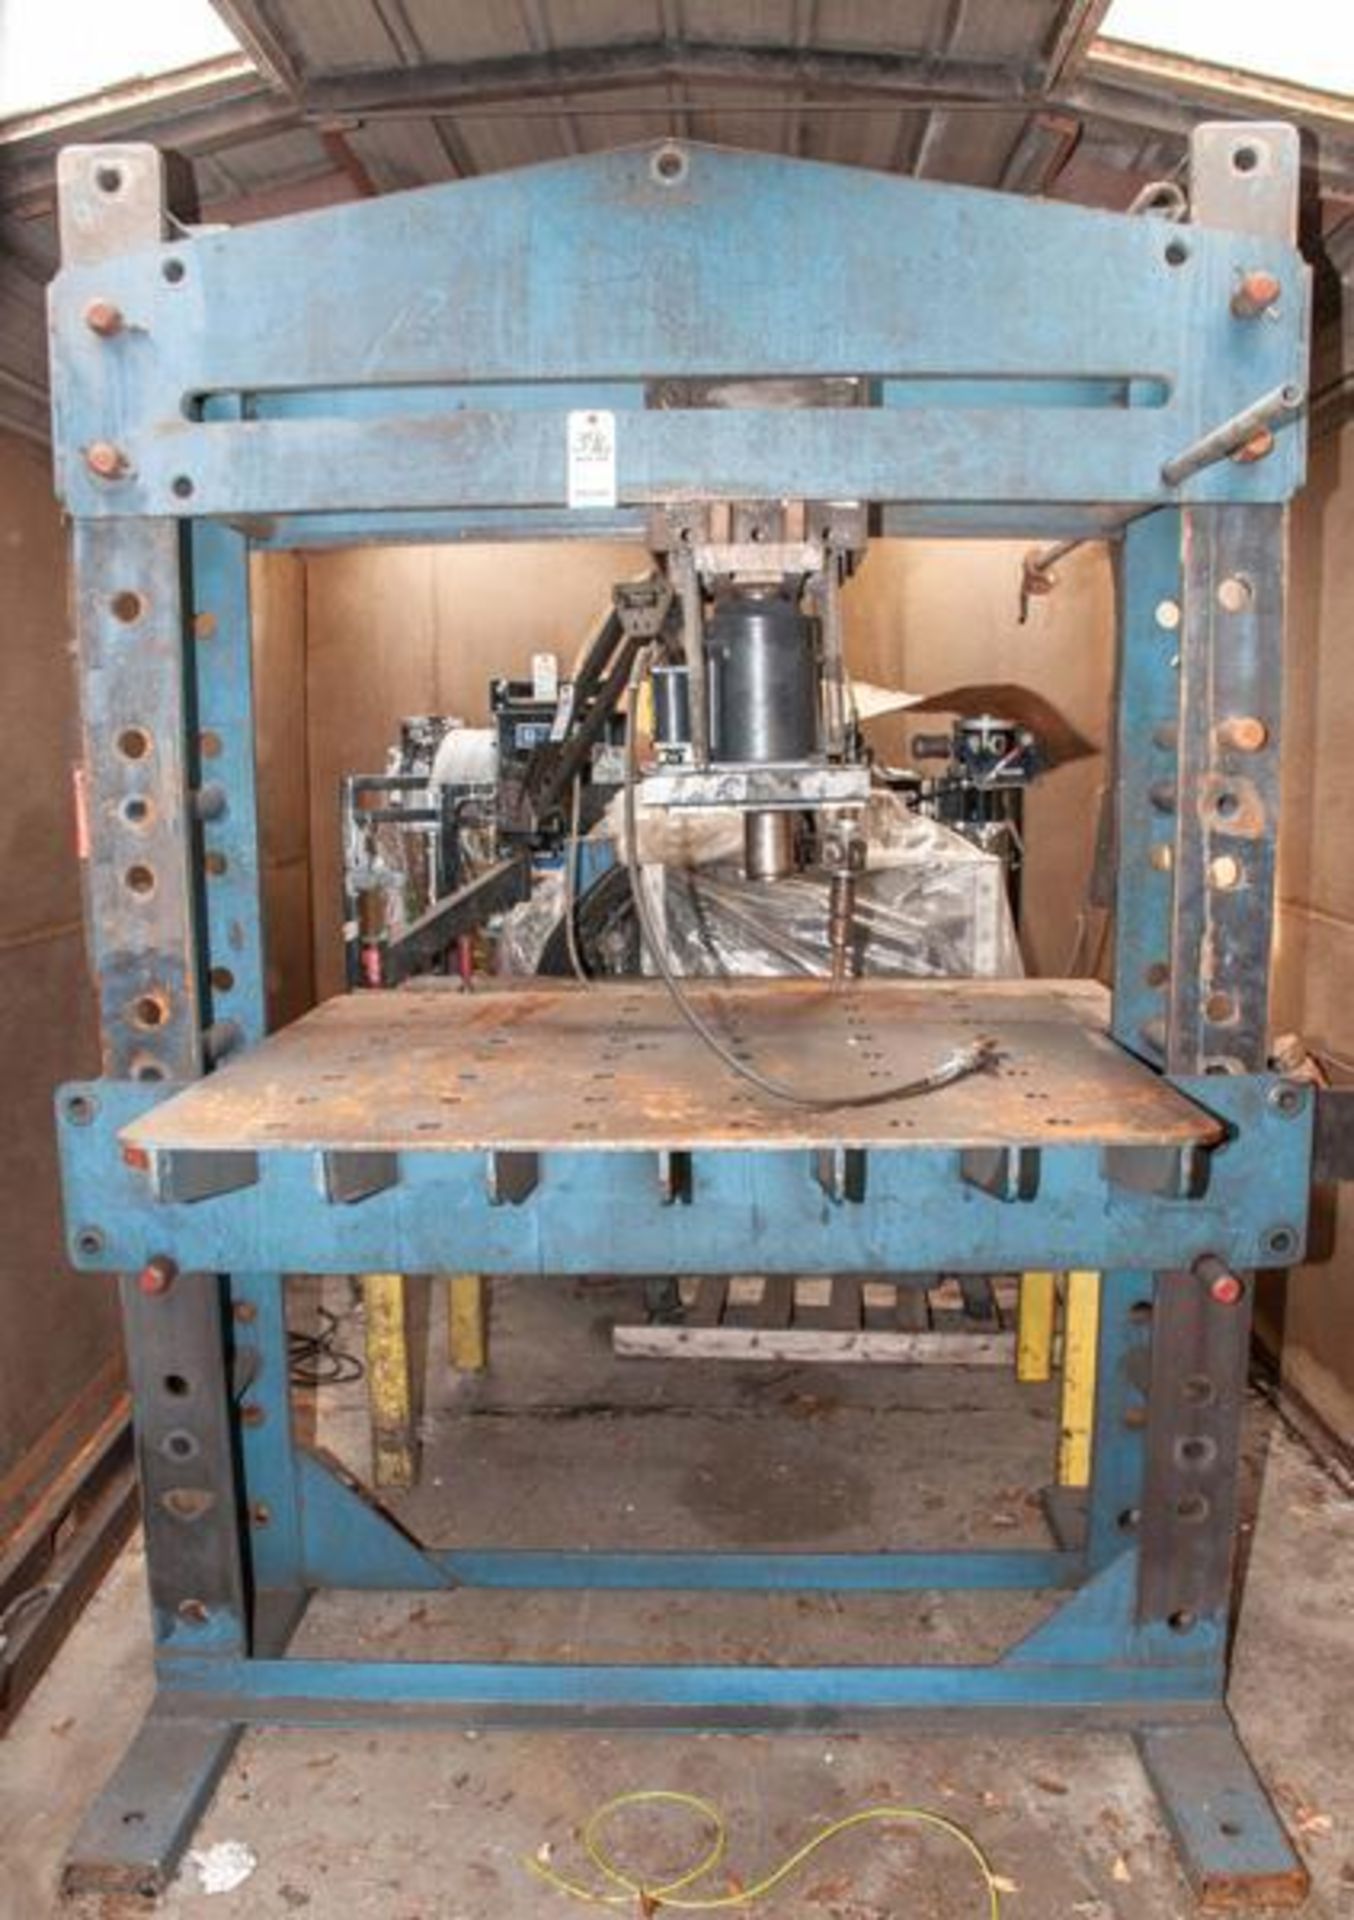 Sliding head air/hydraulic press 50 ton cylinder, table approx. 56 x 48" distance between uprights 5